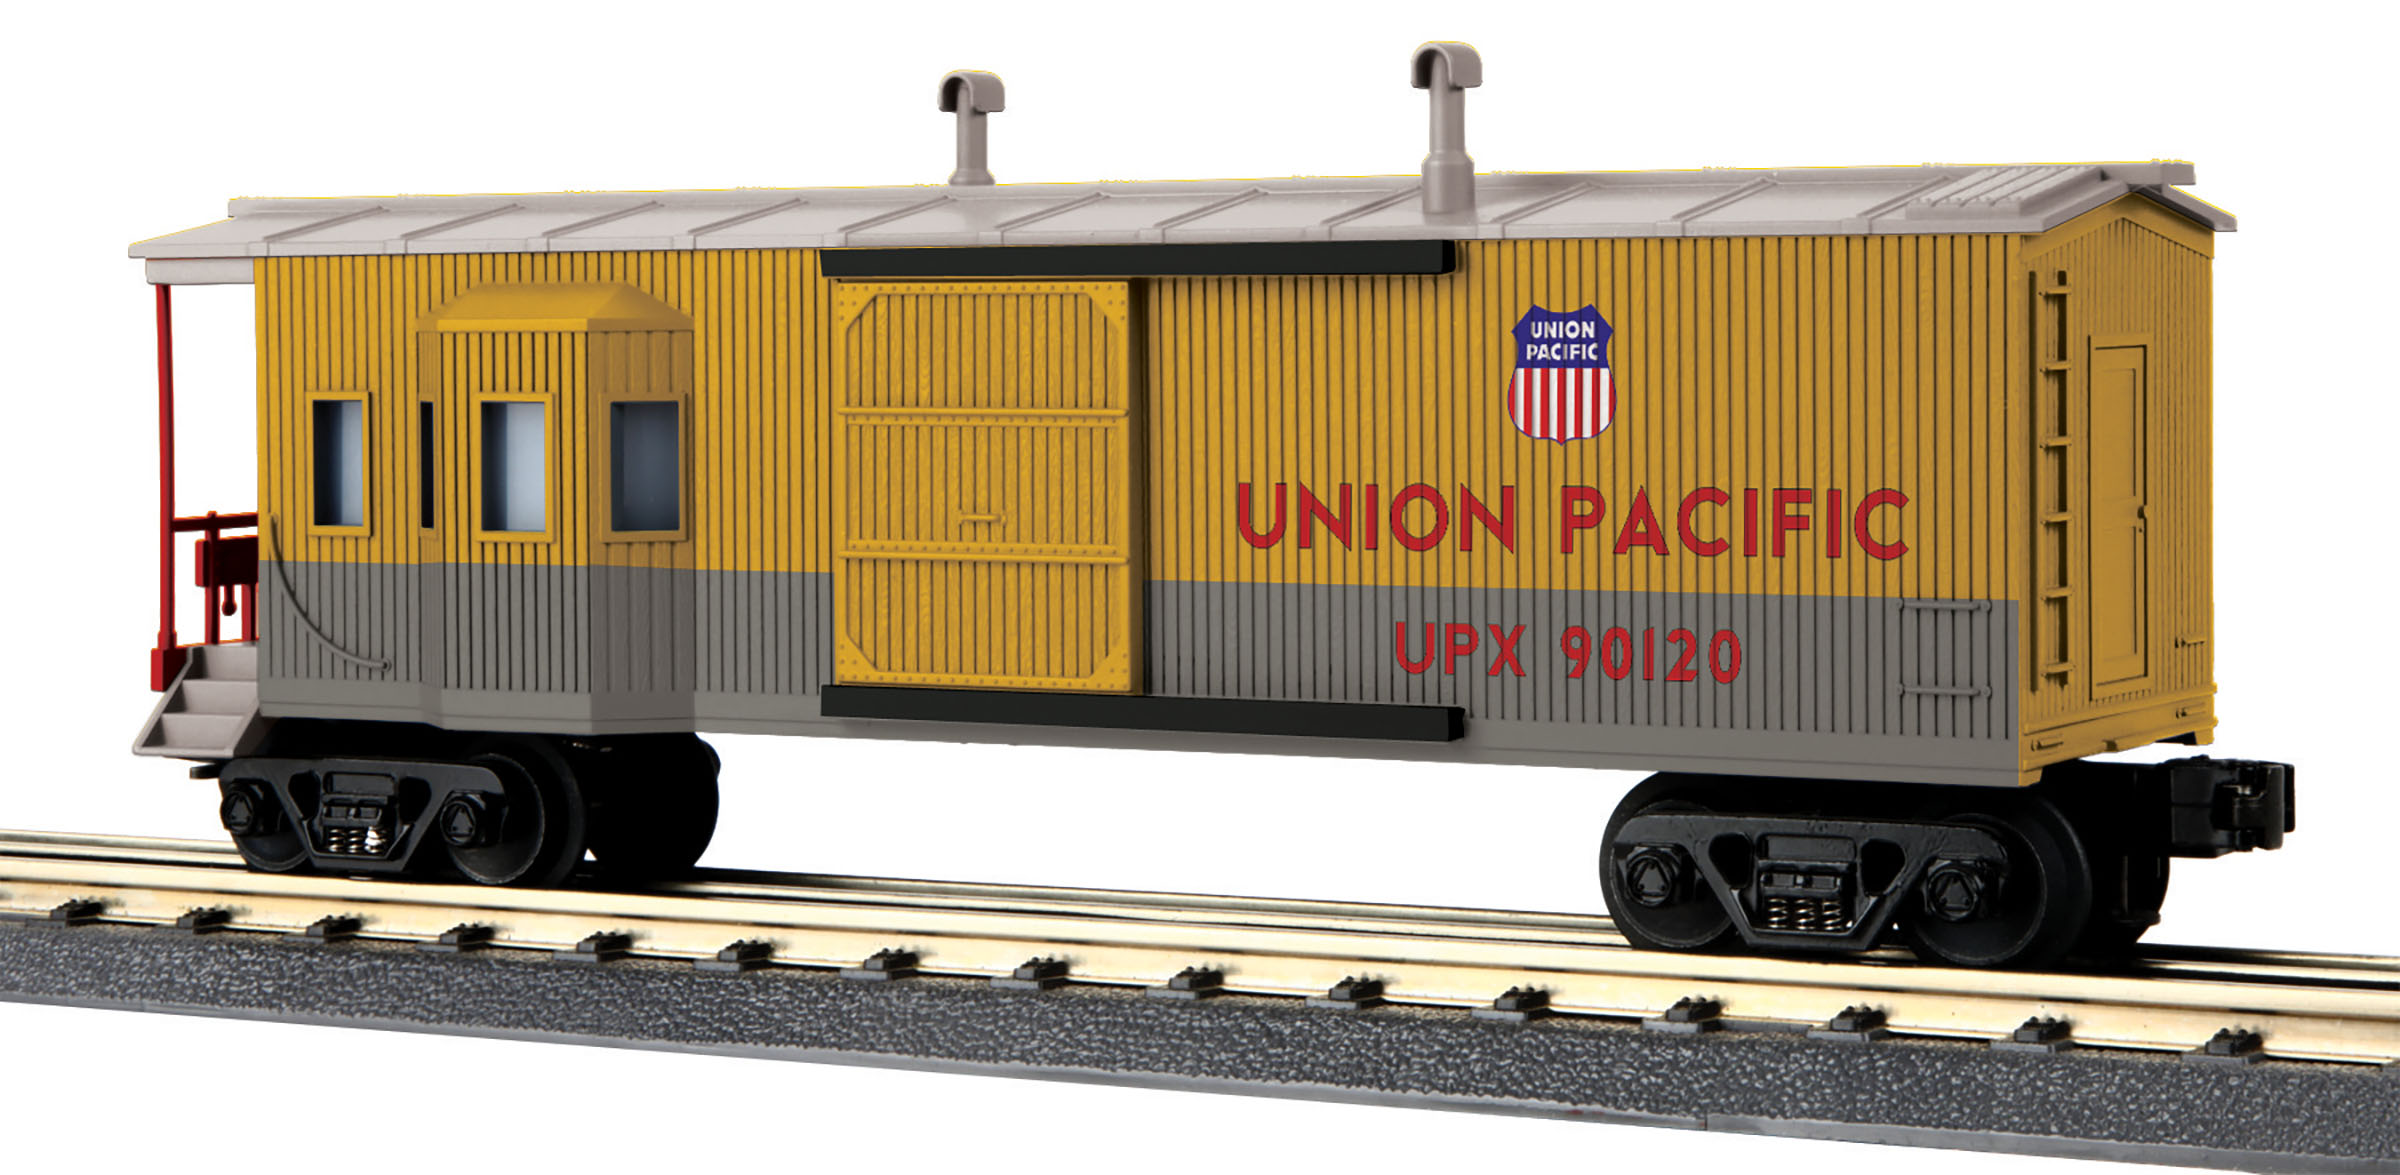 Union Pacific Work Caboose image